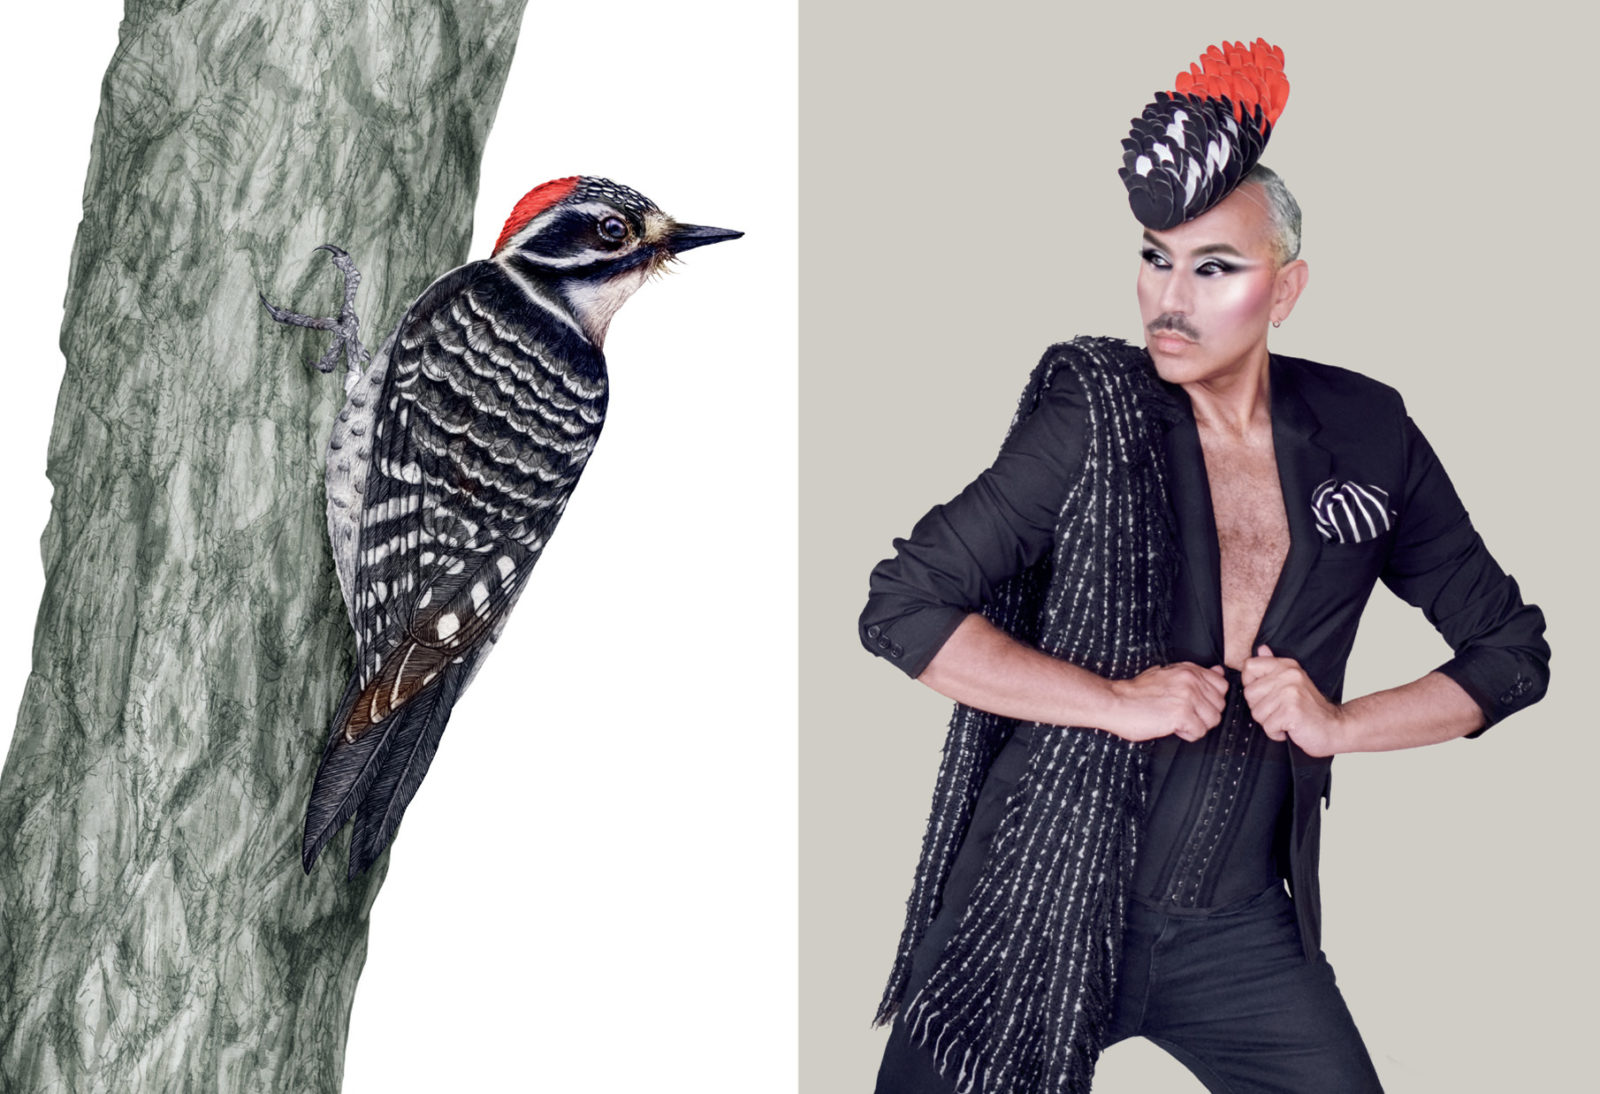 Paul Harfleet is photographed dressed up as a Nuttall’s woodpecker, he is wearing a black blazer with a black corset underneath, a black and white striped scarf over one shoulder and a black, white and red feather head piece. His Eye make up is black and white, the black eye shadow coming from his eyeliner sweeps up towards his temples. Next to him is a detailed illustration of the Nuttall’s woodpecker.